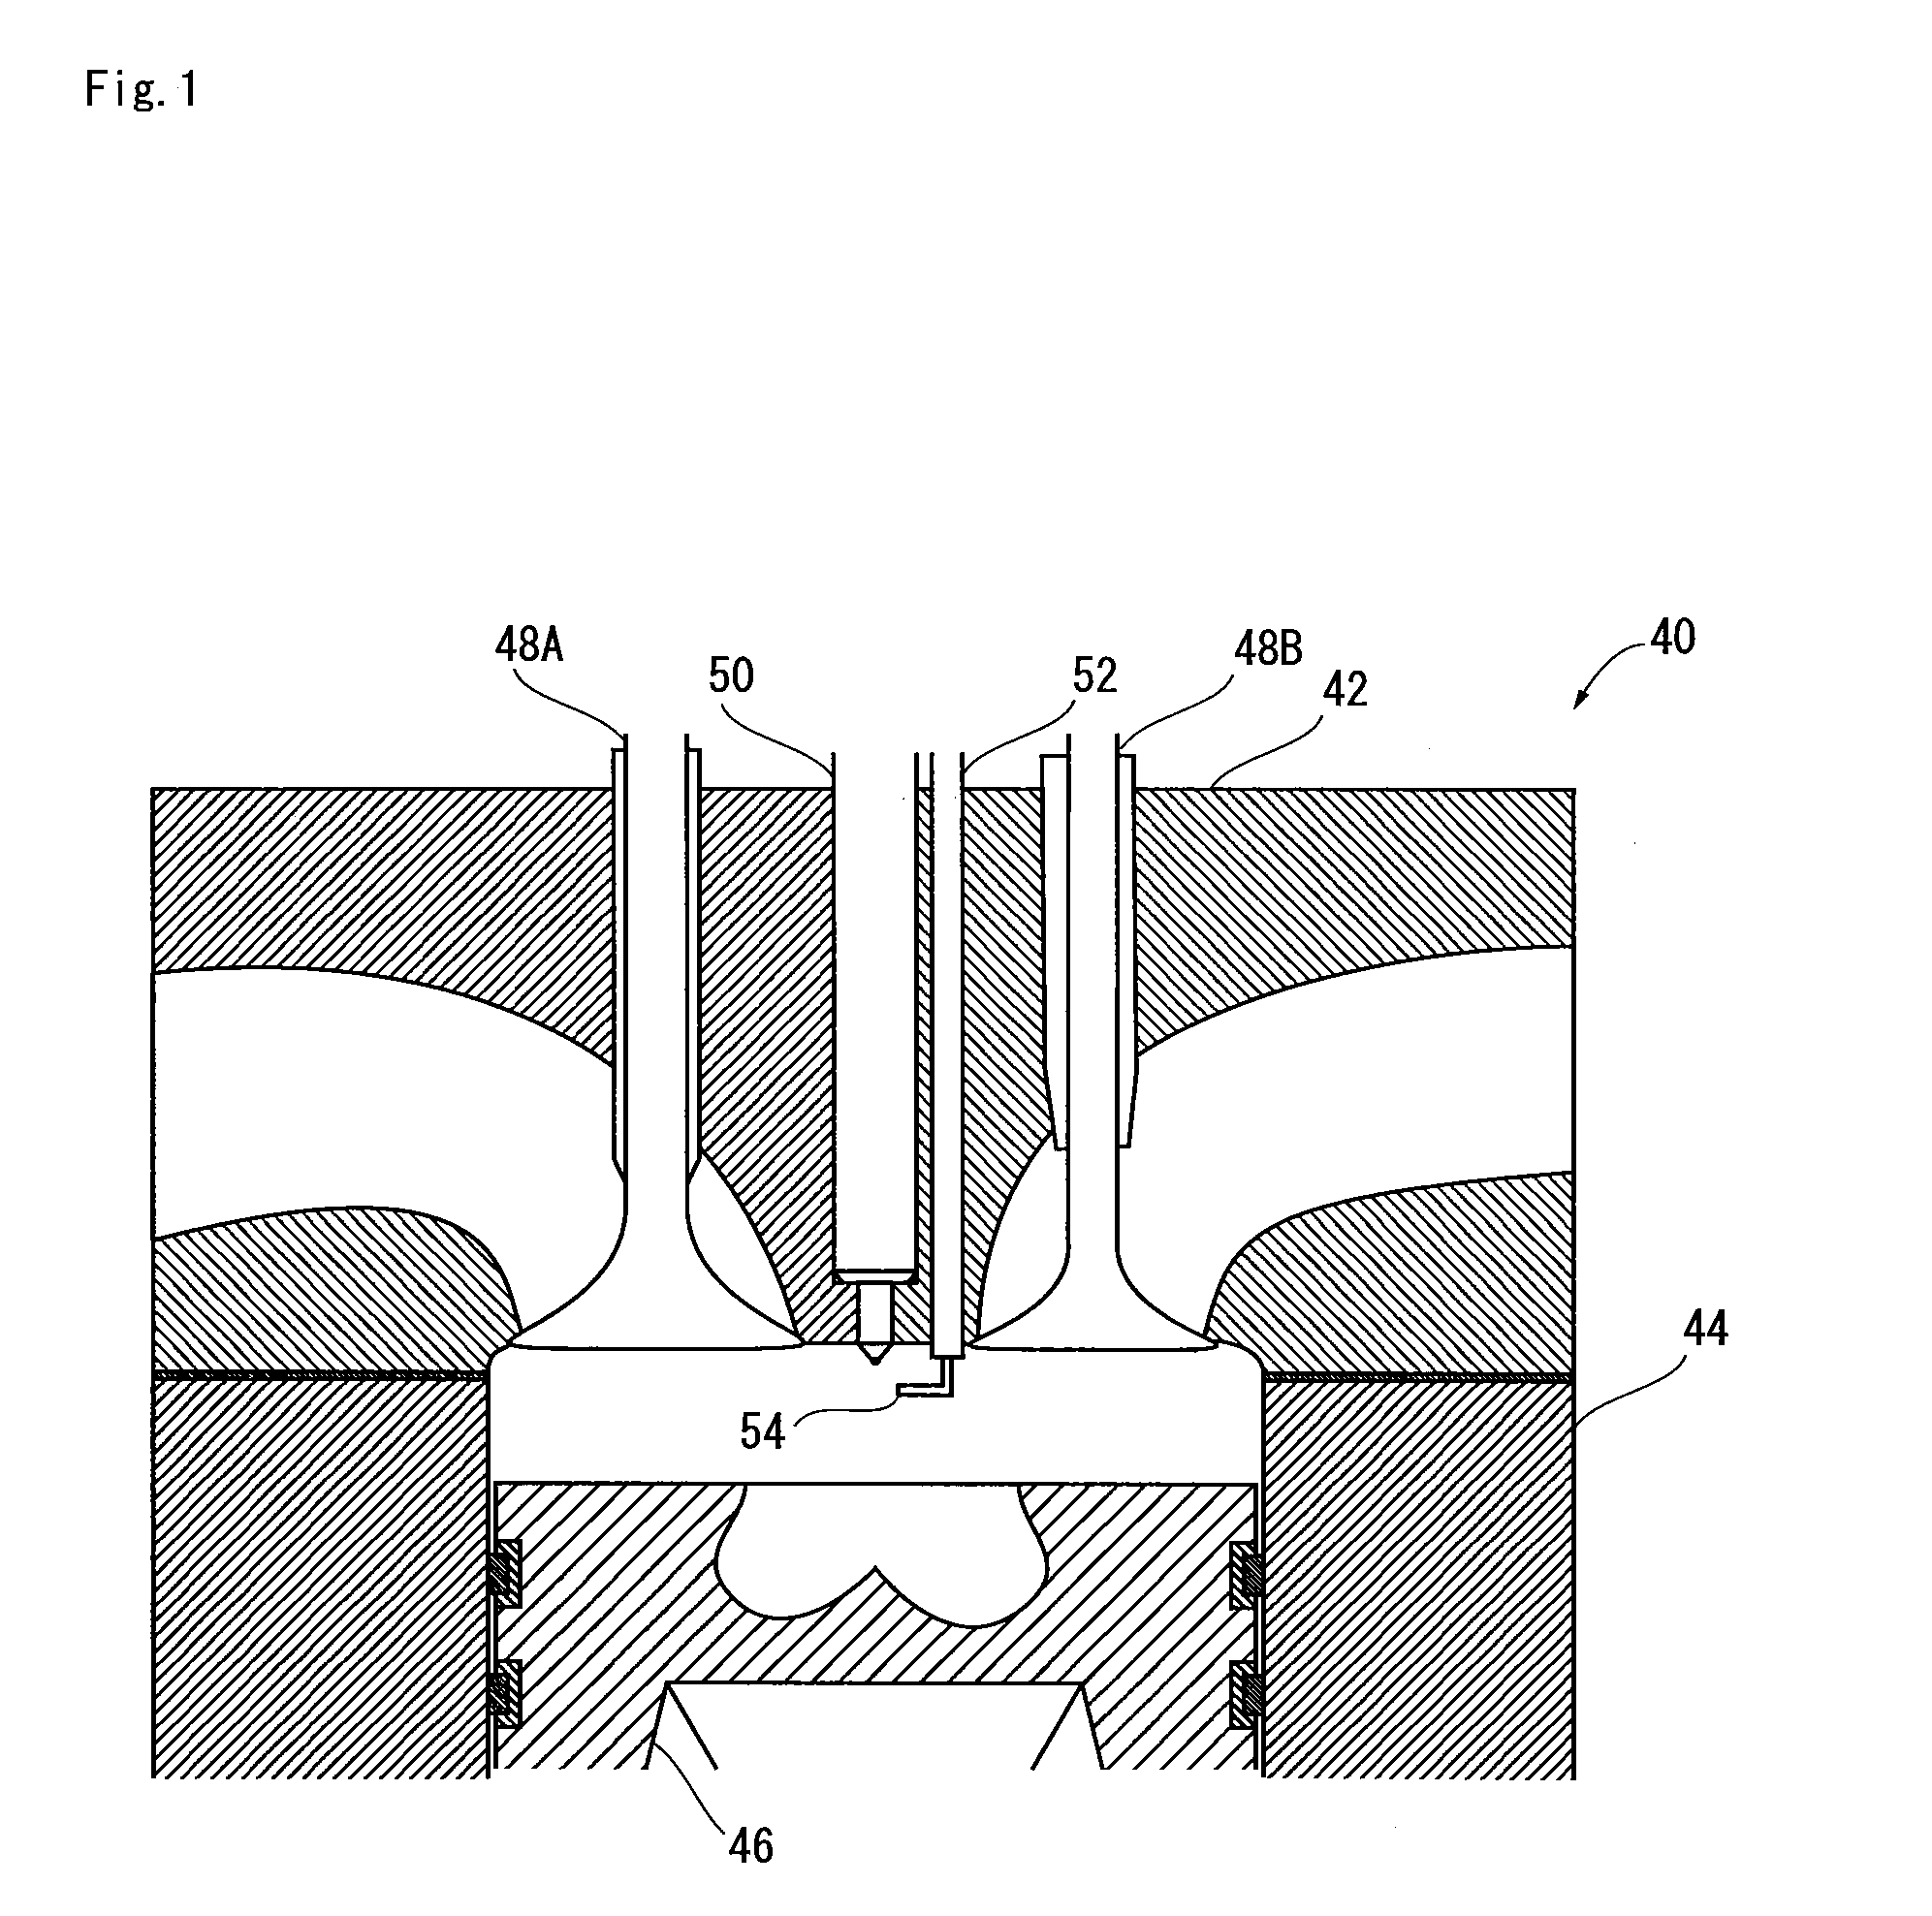 Compression ignition internal combustion engine, glow plug, and injector